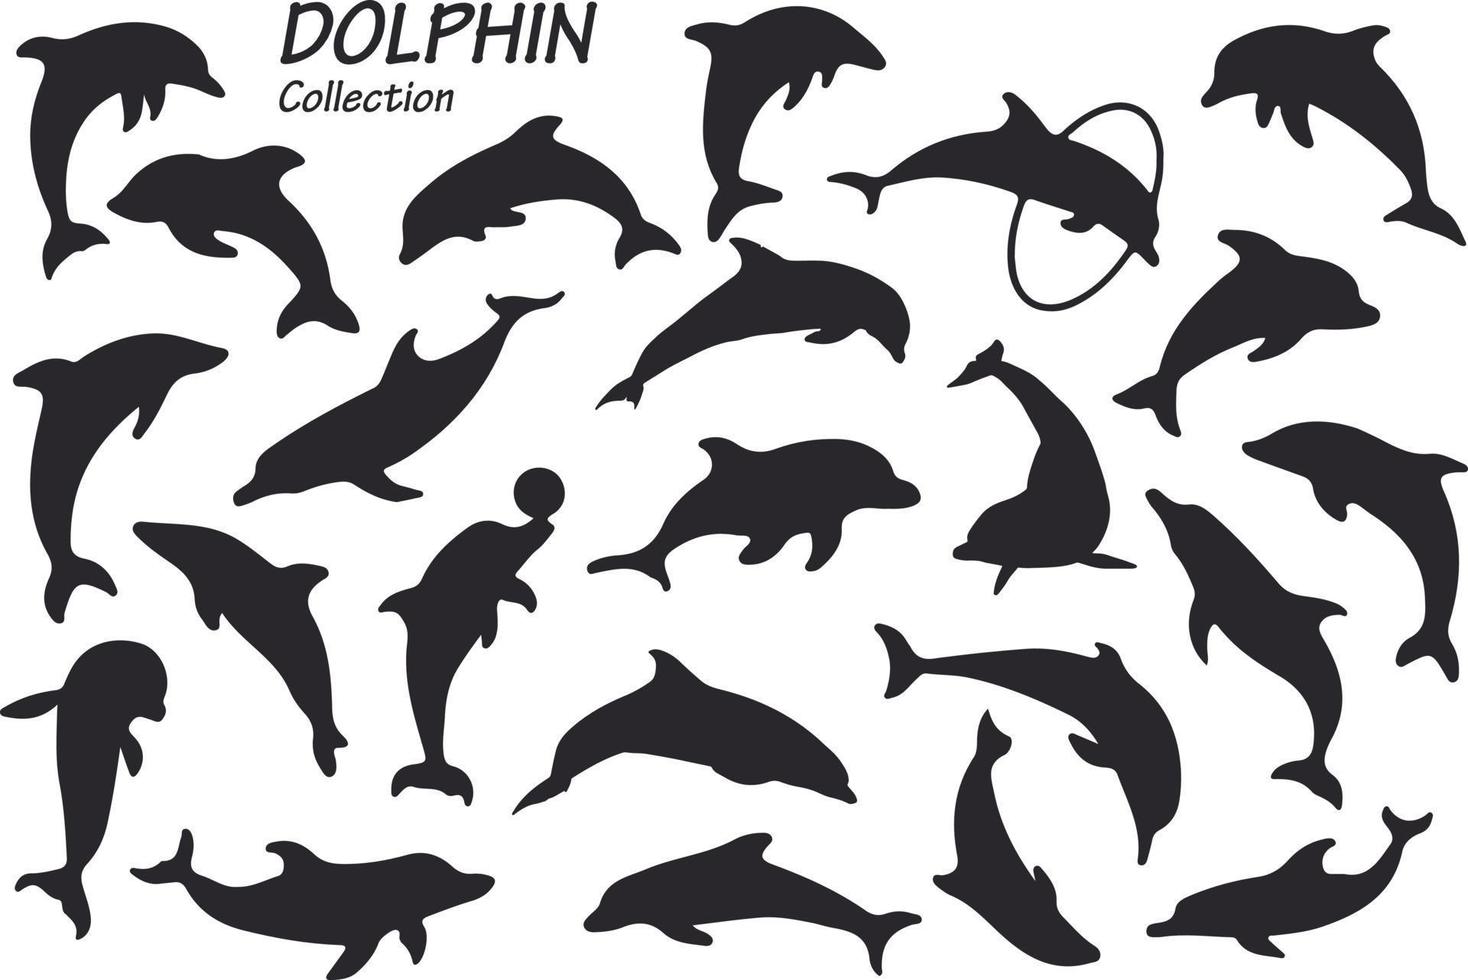 dolphin silhouettes pack vector